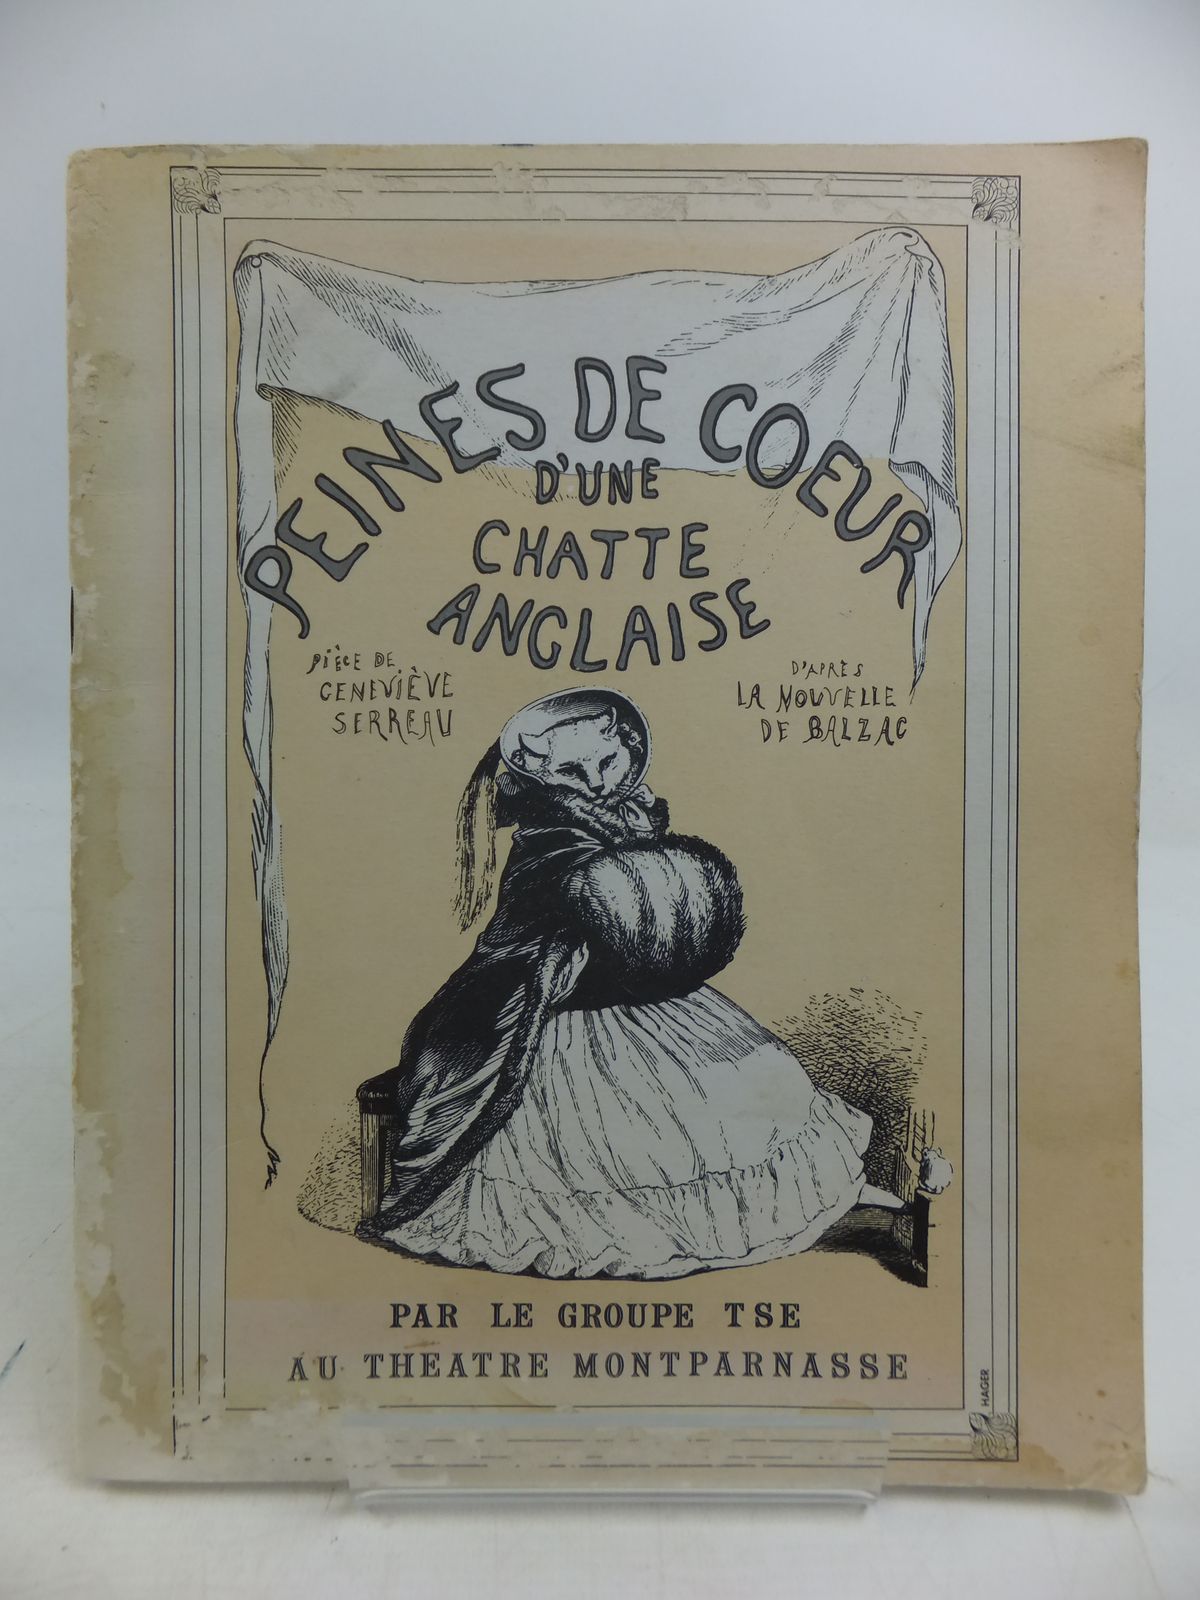 Photo of PEINES DE COEUR D'UNE CHATTE ANGLAISE written by De Balzac, Honore published by Publications Willy Fischer (STOCK CODE: 1108863)  for sale by Stella & Rose's Books